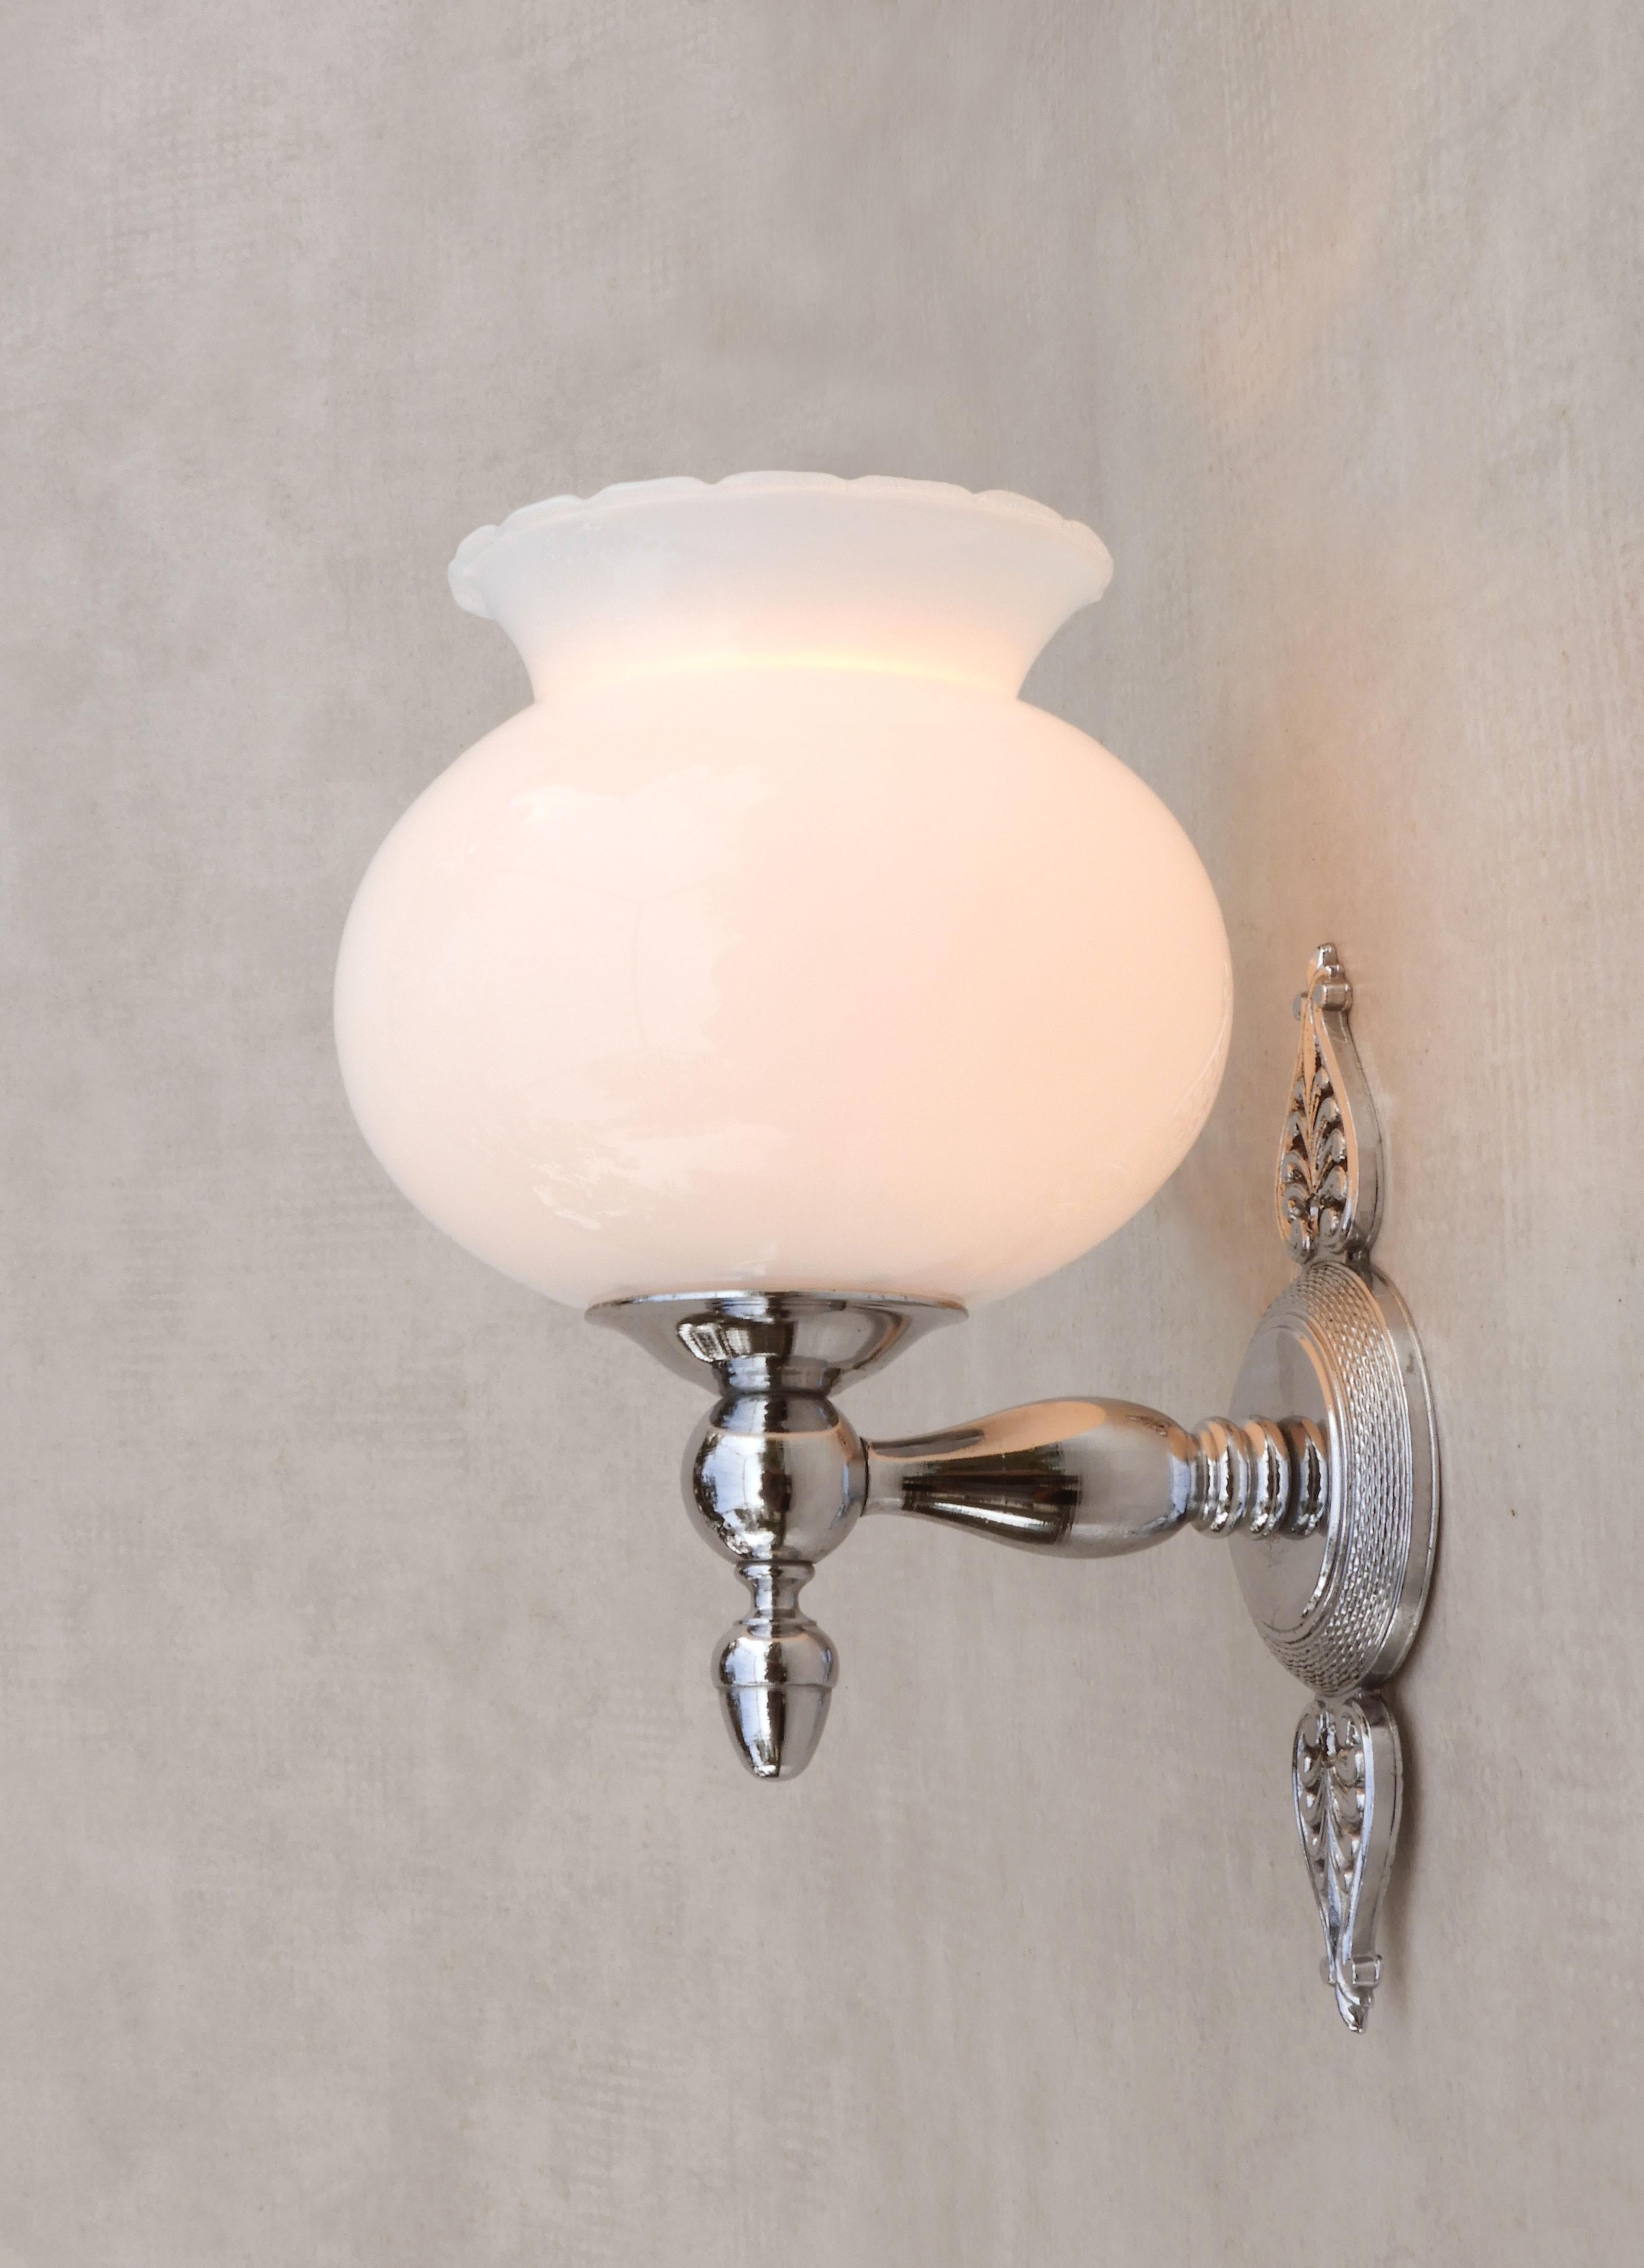 20th Century French Empire Revival Wall Light Sconces in Opaline and Chrome, circa 1970 For Sale